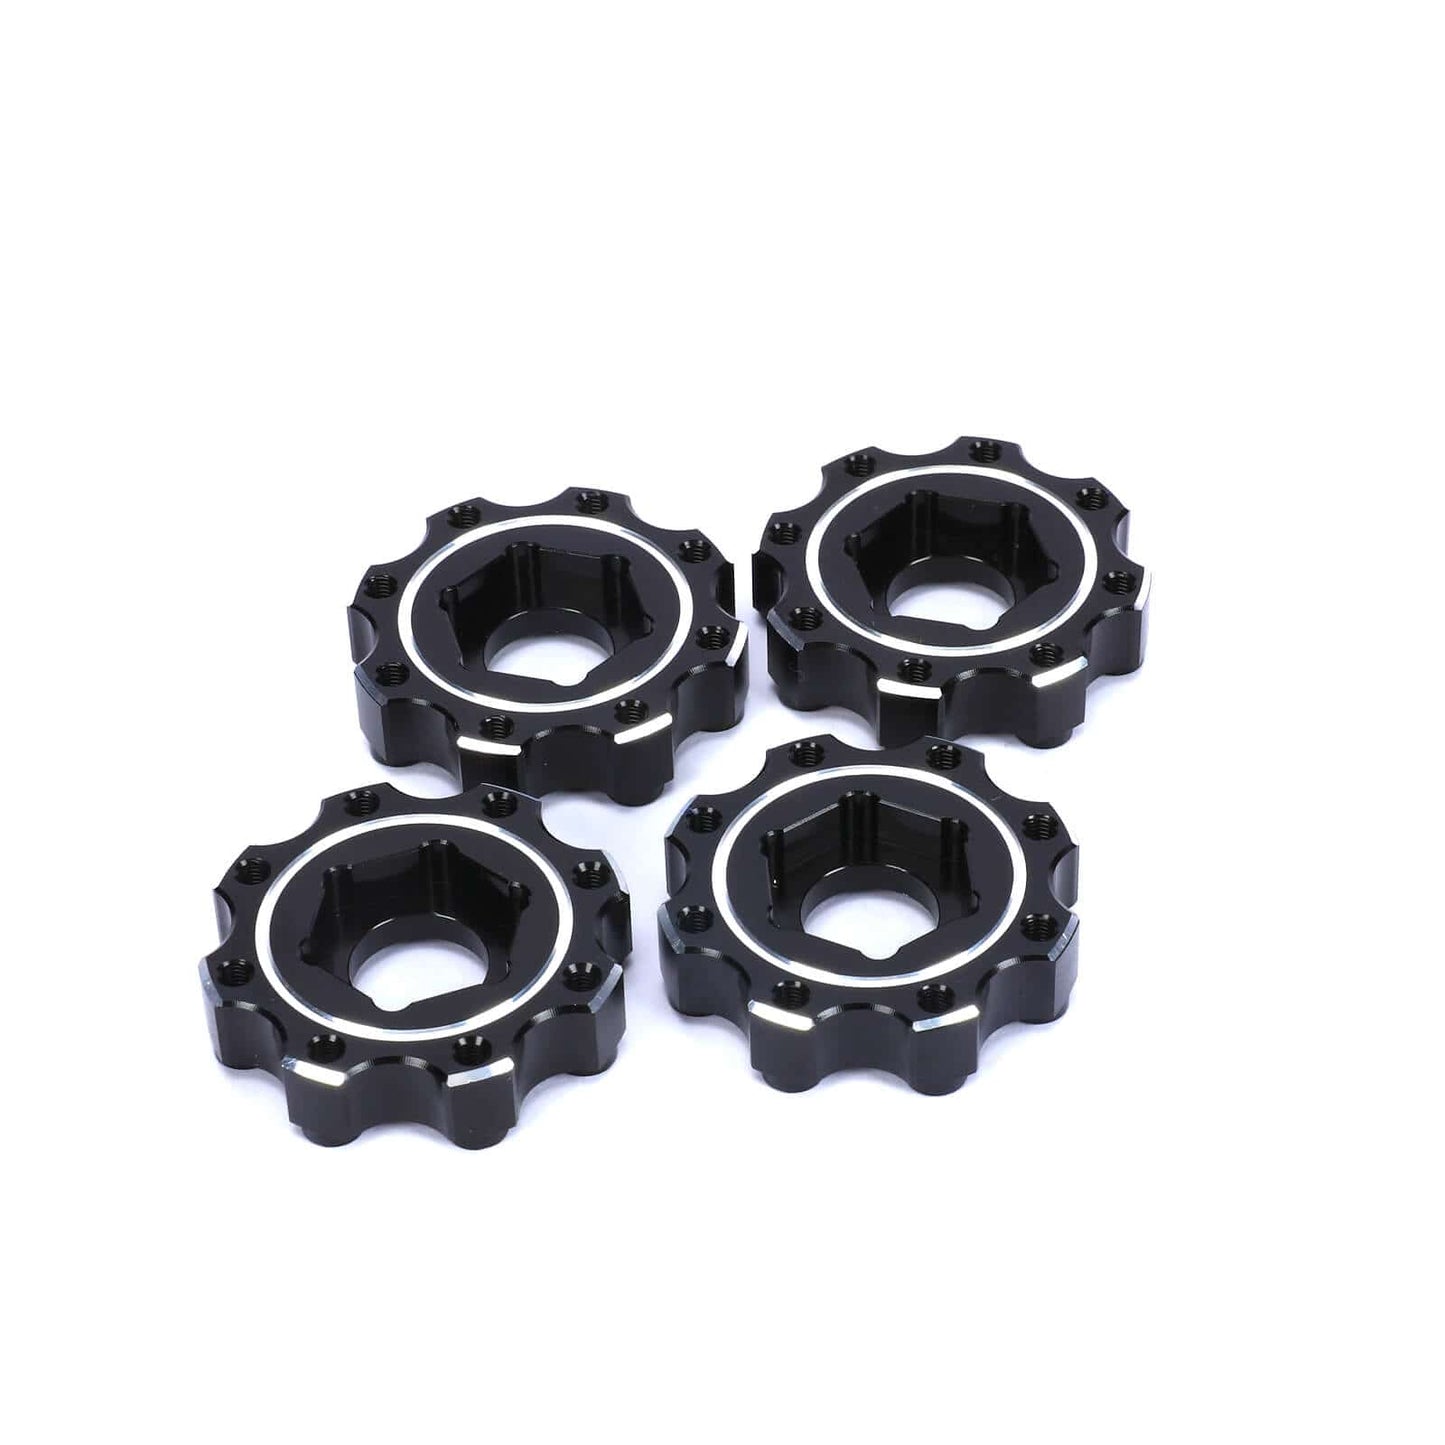 RCAWD UNIHEX 1/8 8x32 to 17mm ZERO Offset Aluminum Hex Adapters for Pro-line Narrow 3.8" TiresBlack